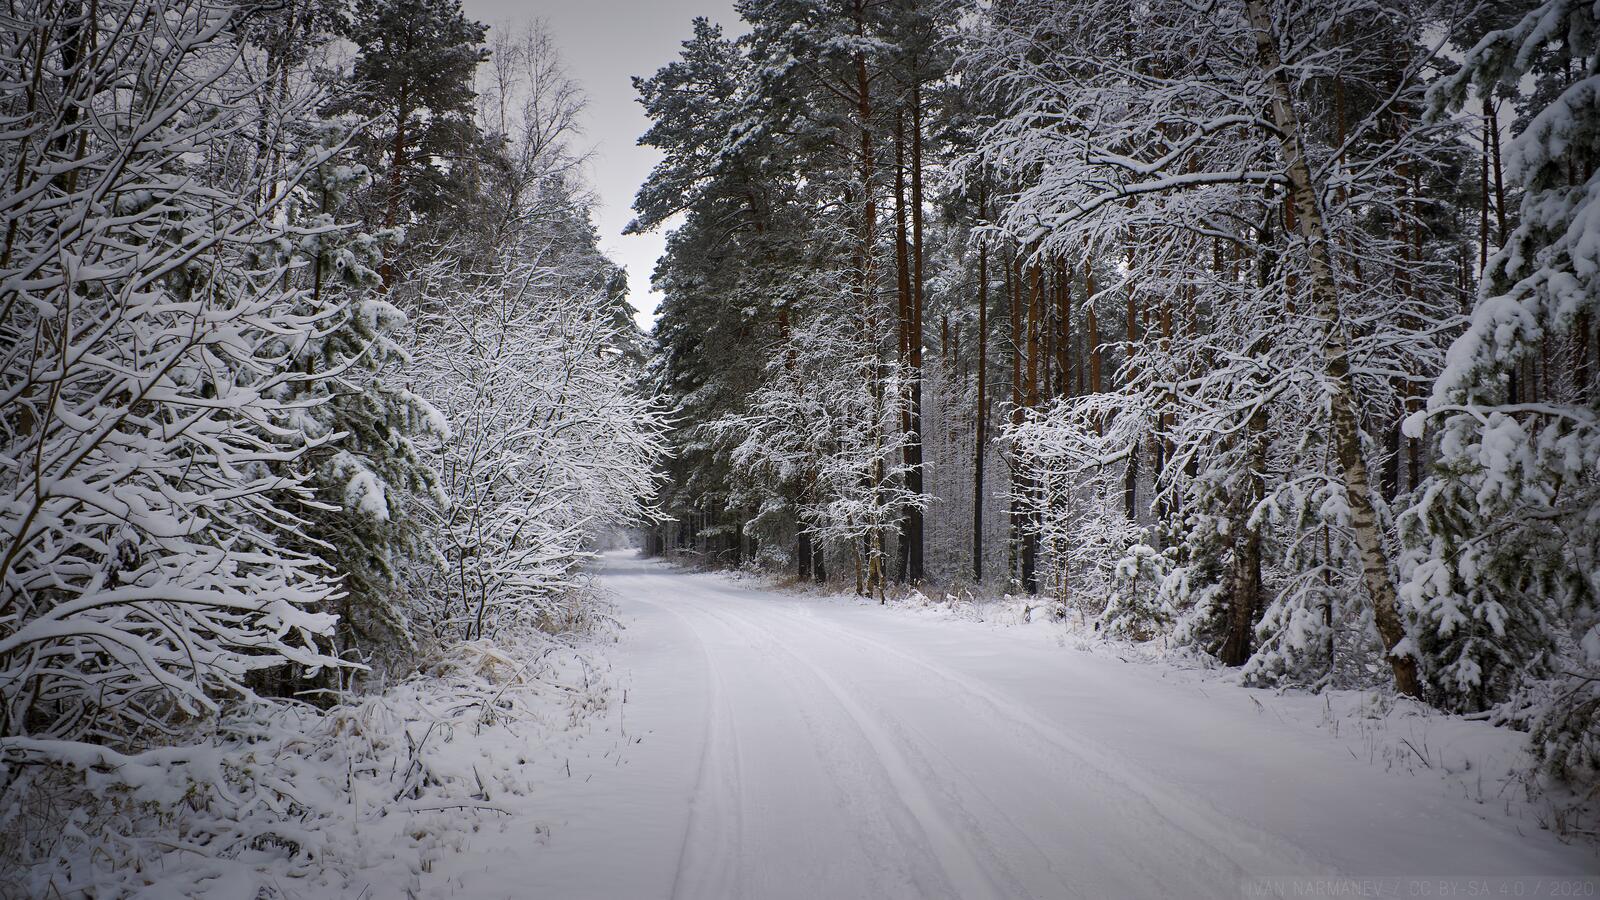 Free photo A snowy forest road with car tracks